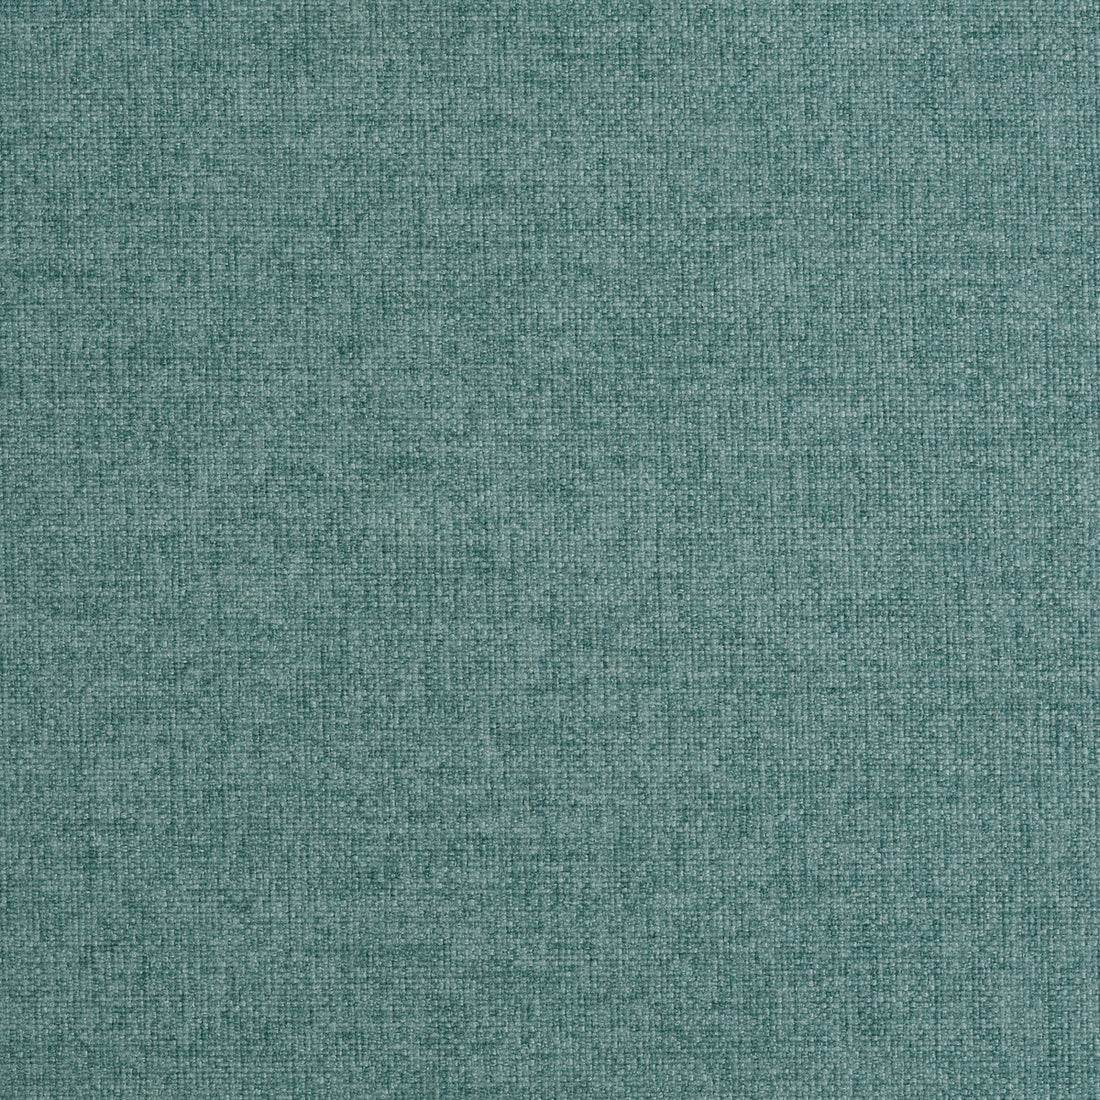 Kravet Contract fabric in 35122-35 color - pattern 35122.35.0 - by Kravet Contract in the Crypton Incase collection